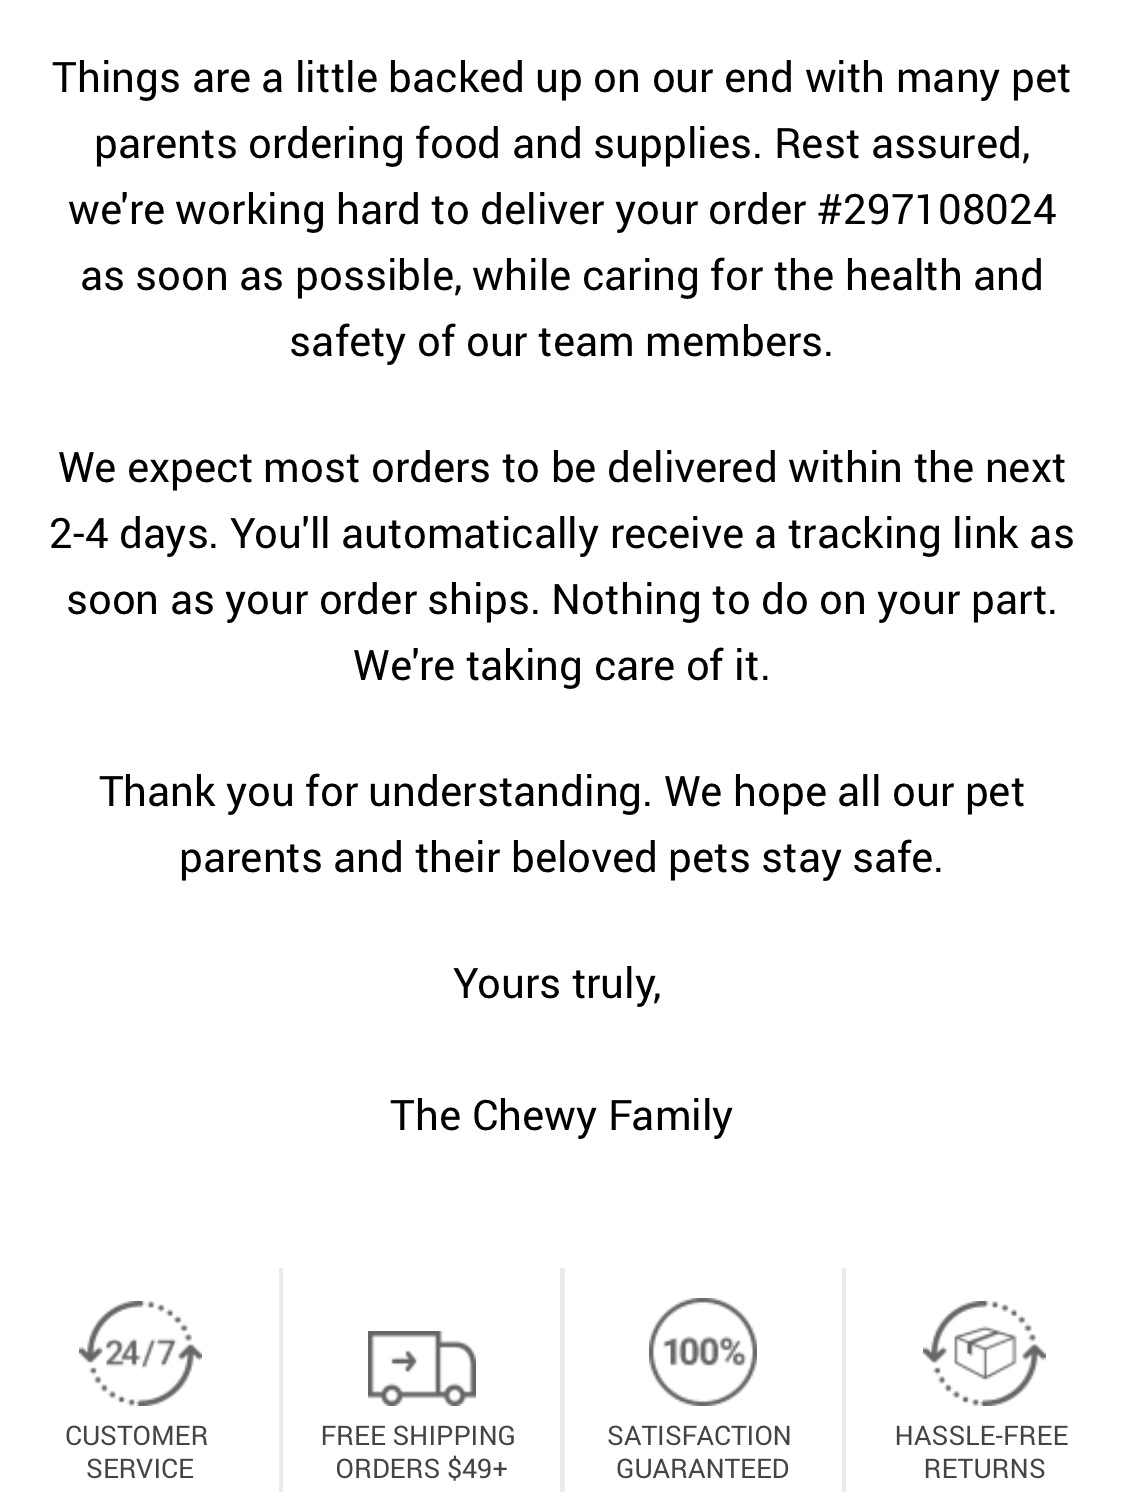 Chewy proactively communicates about shipment delays